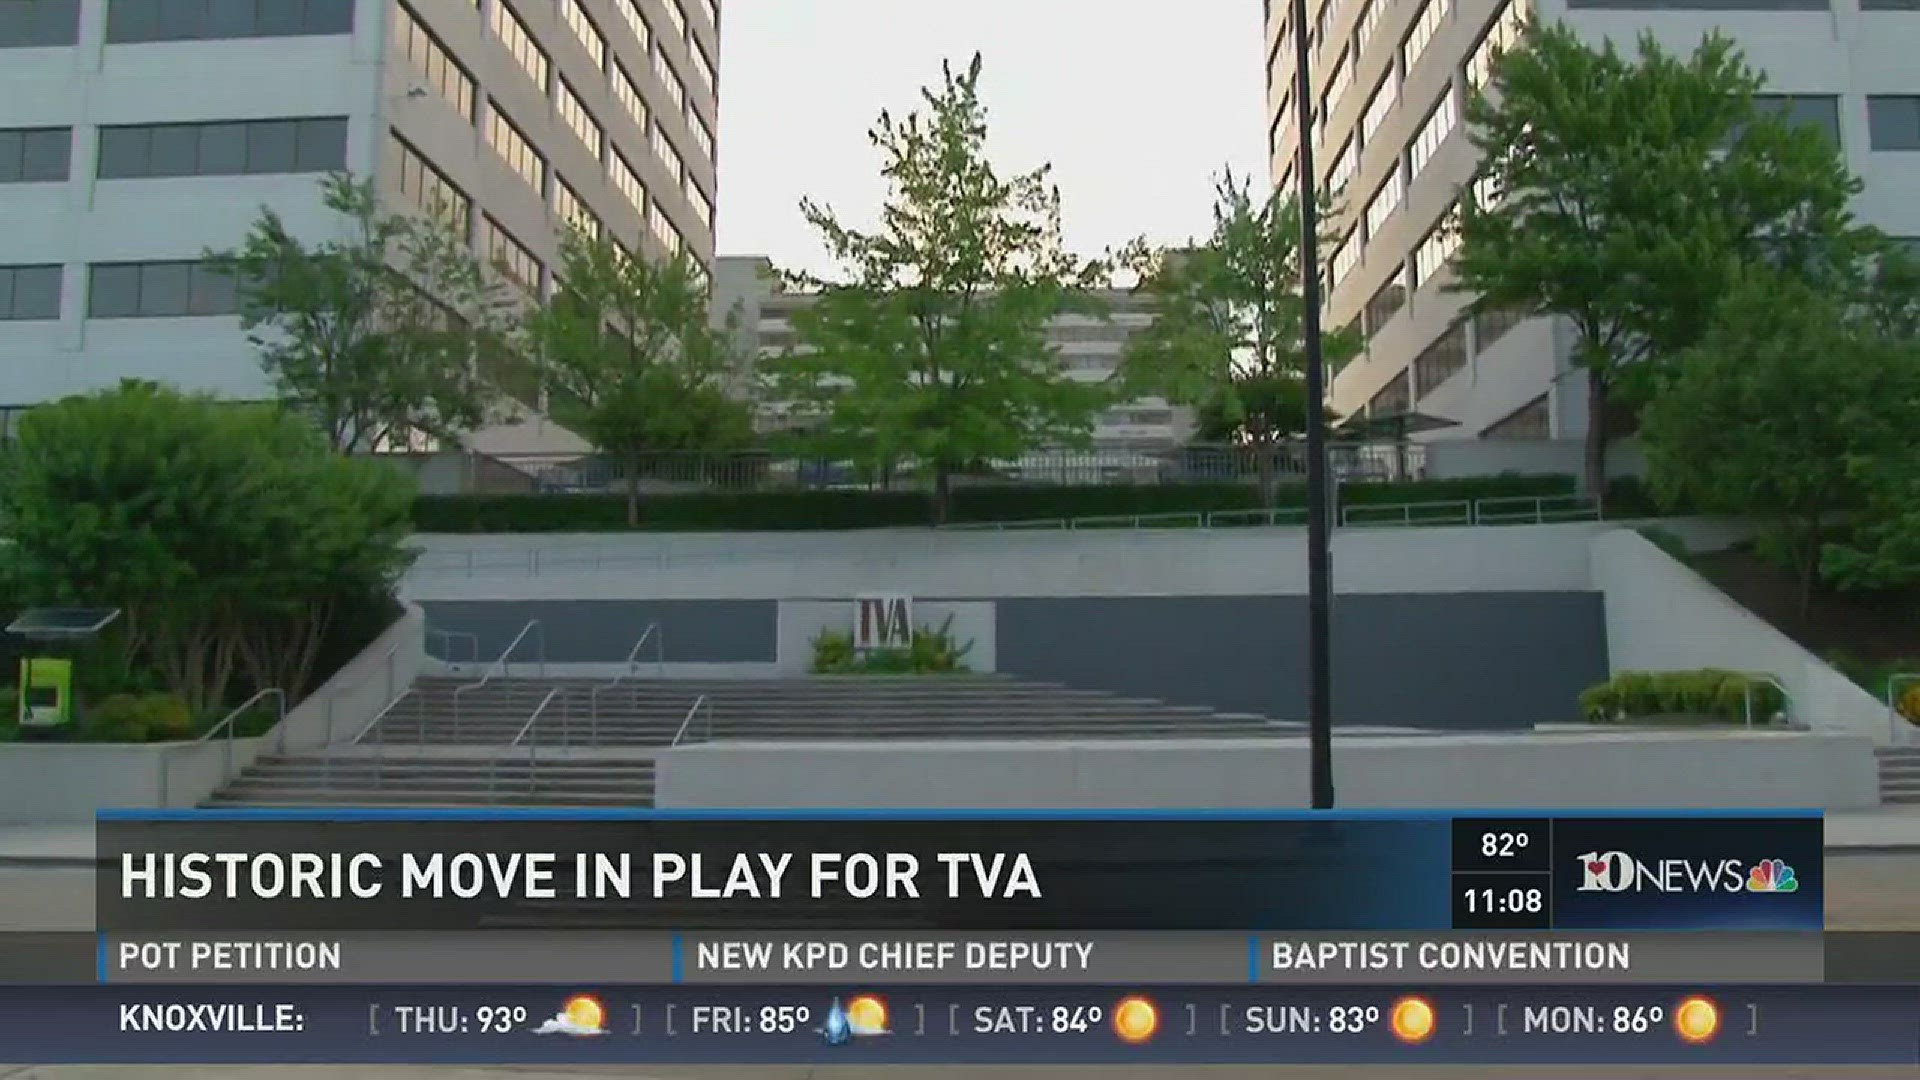 10News reporter Rachel Wittel has more on how TVA is considering selling the company's iconic twin towers on Market Square in Knoxville. (6/15/16)